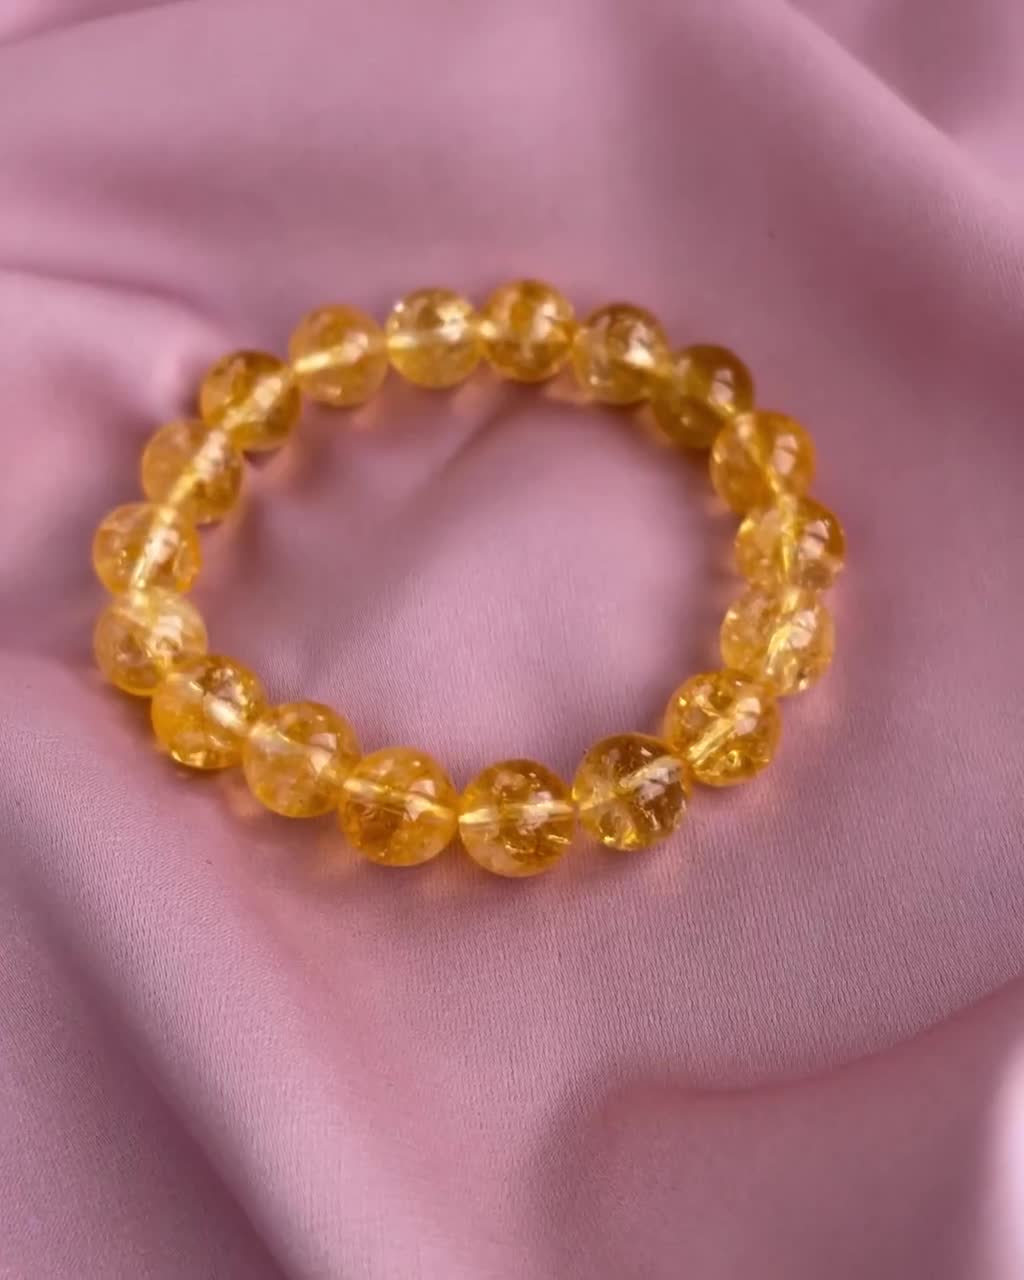 Hi everyone. I'm currently in the hunt of natural citrine bracelet. These  were posted by a crystal seller, claiming these are natural citrine and not  heat treated. What do you guys think? :